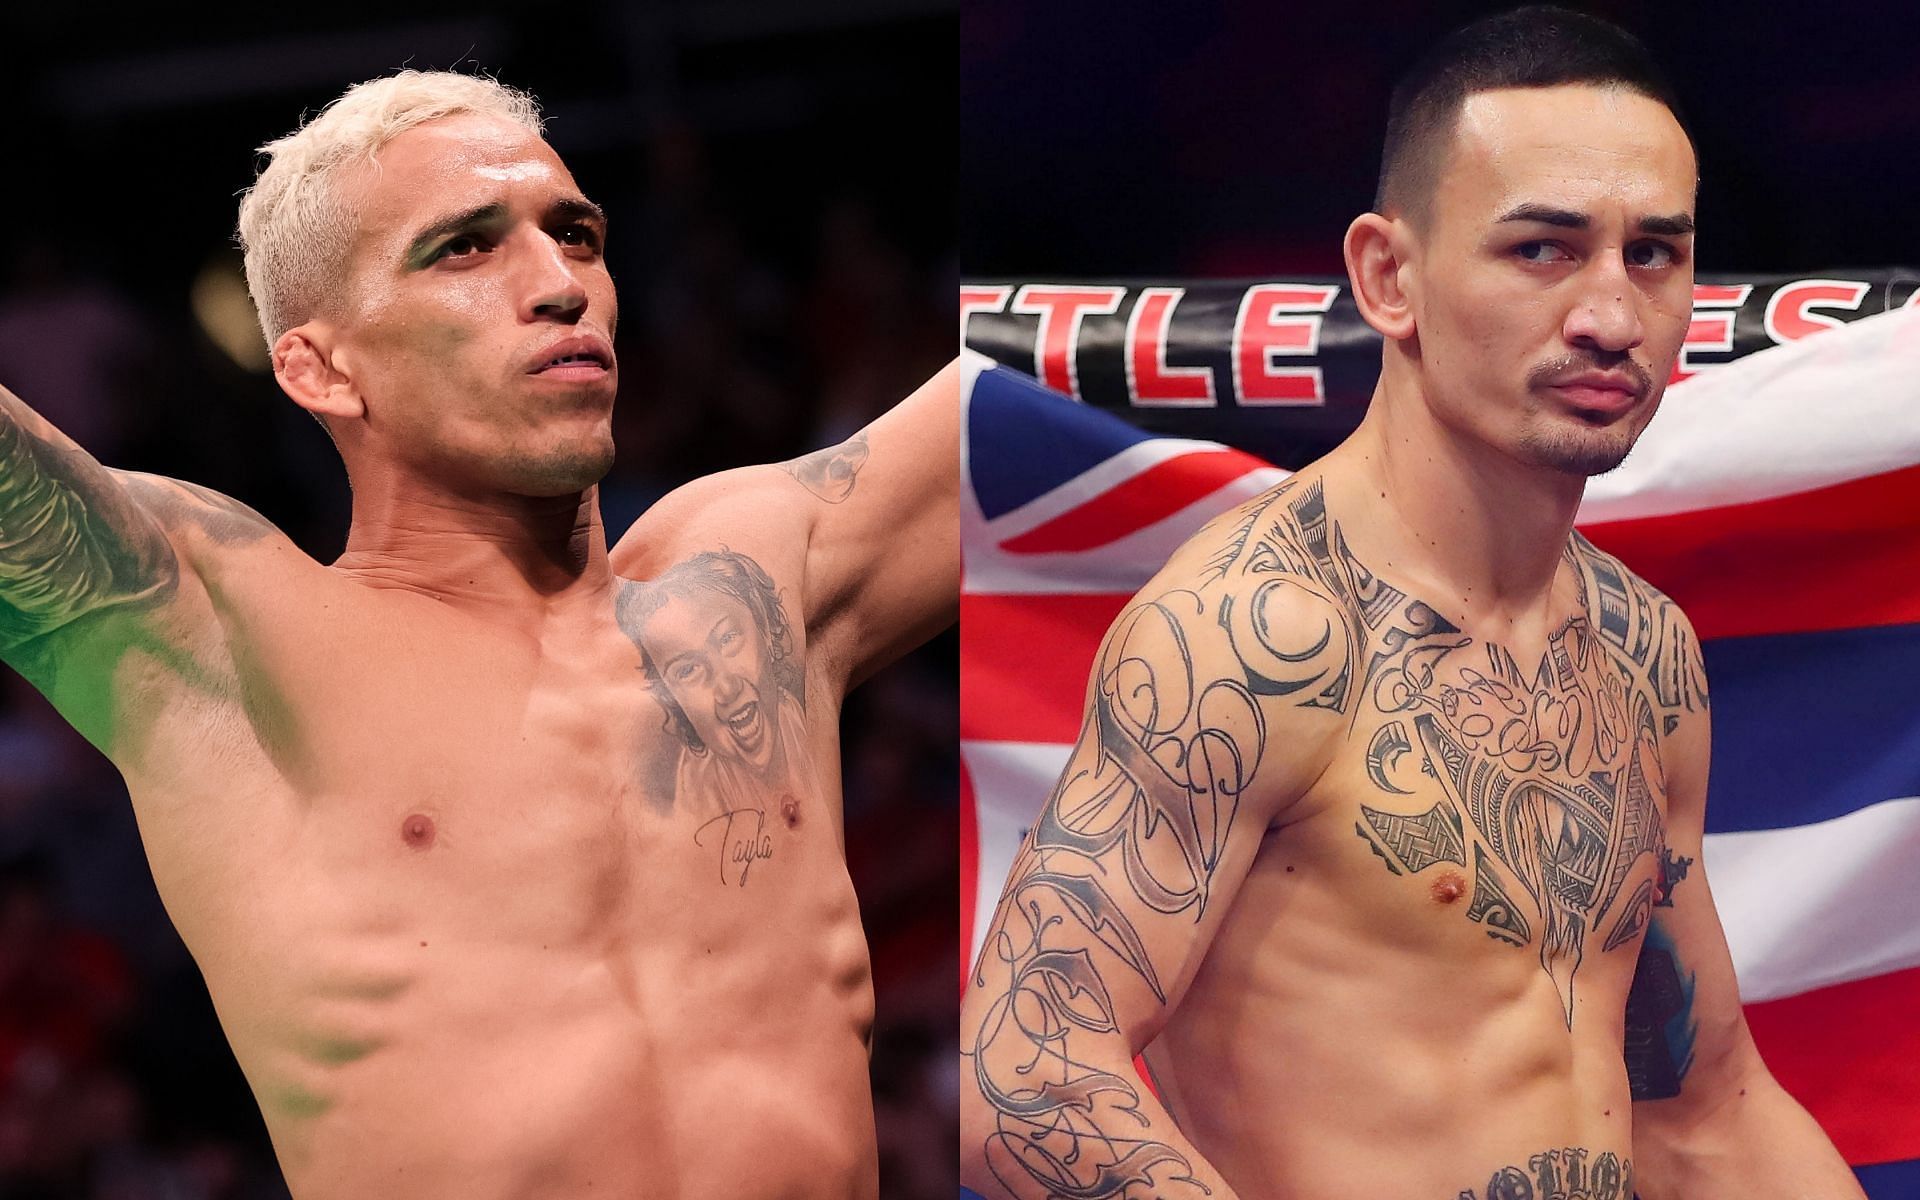 Charles Oliveira (left) and Max Holloway (right) (Images via Getty)